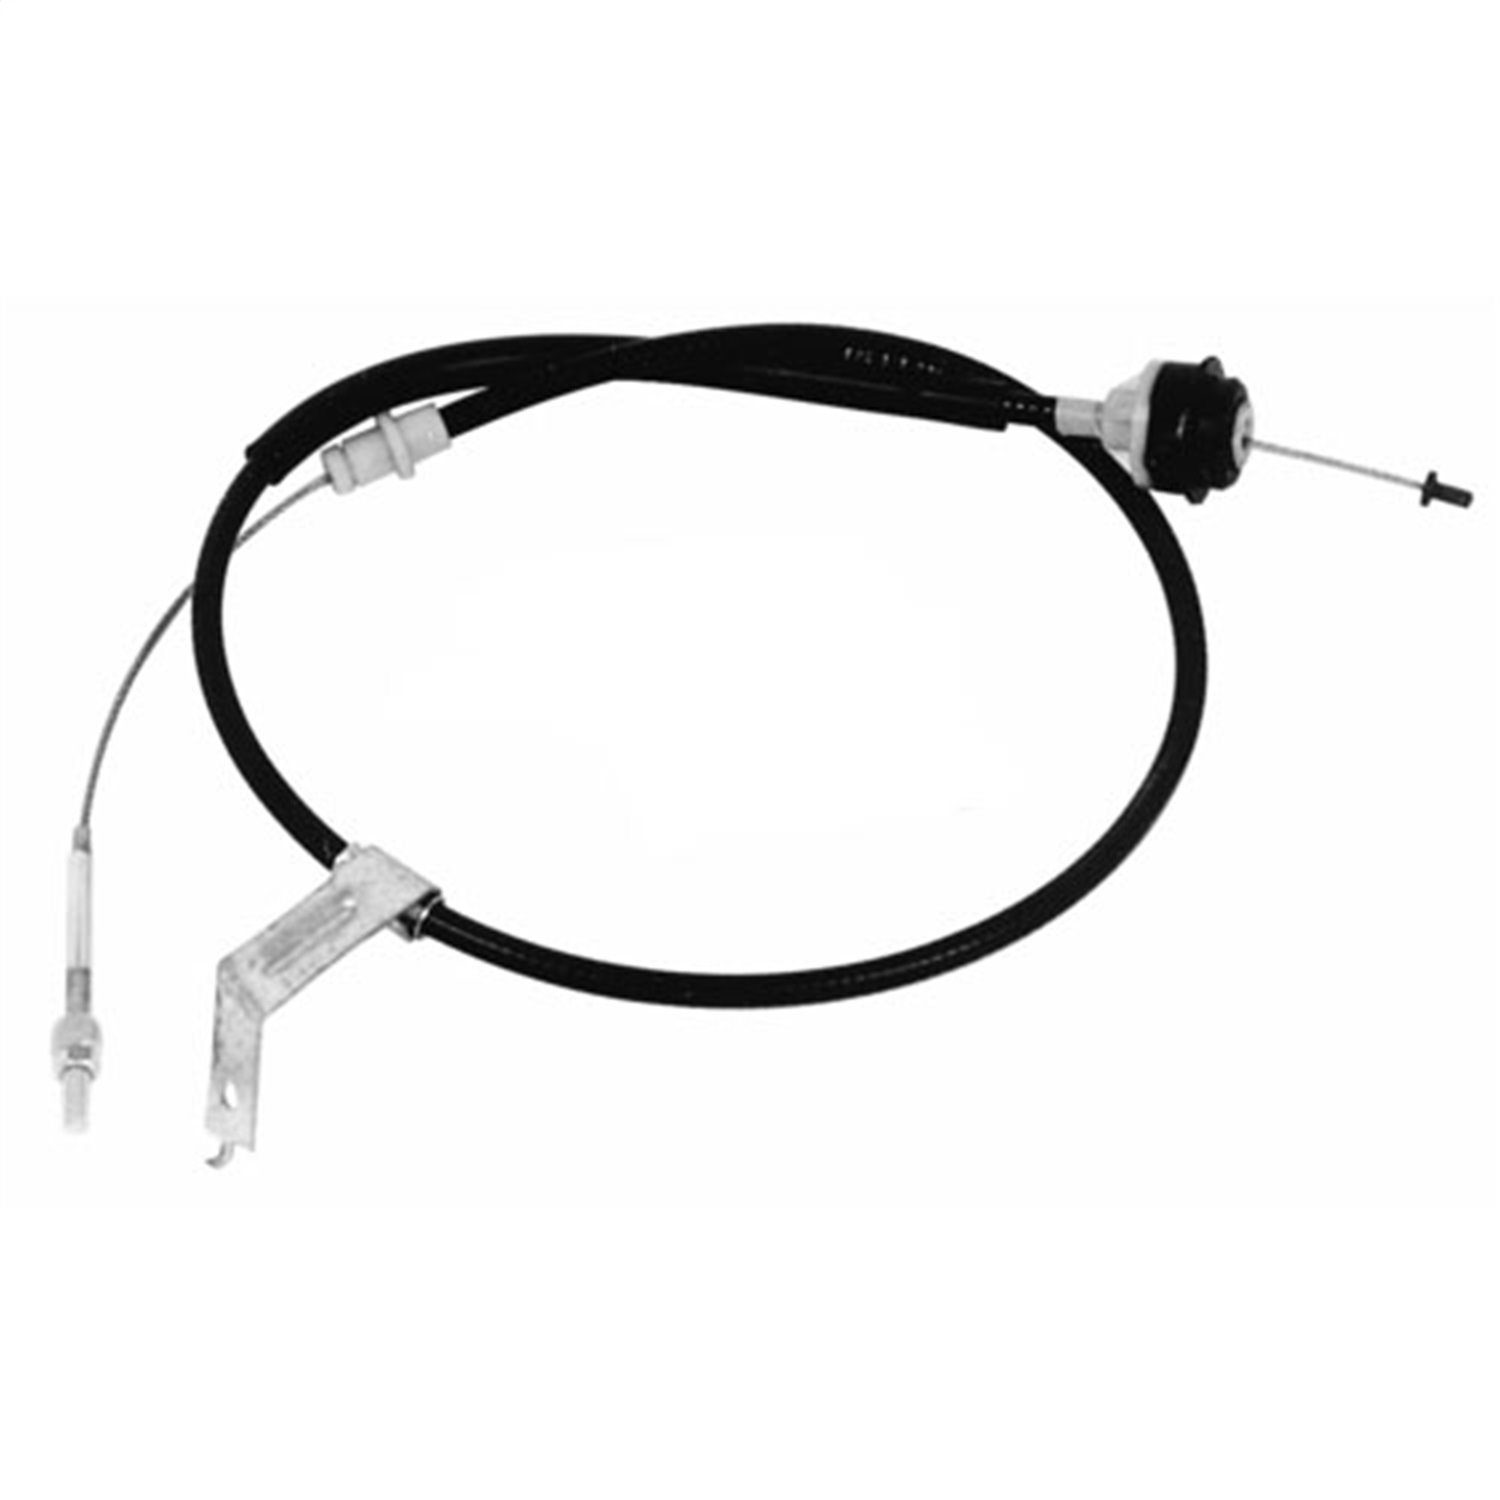 Replacement Clutch Cable 1982-95 Mustang 5.0L